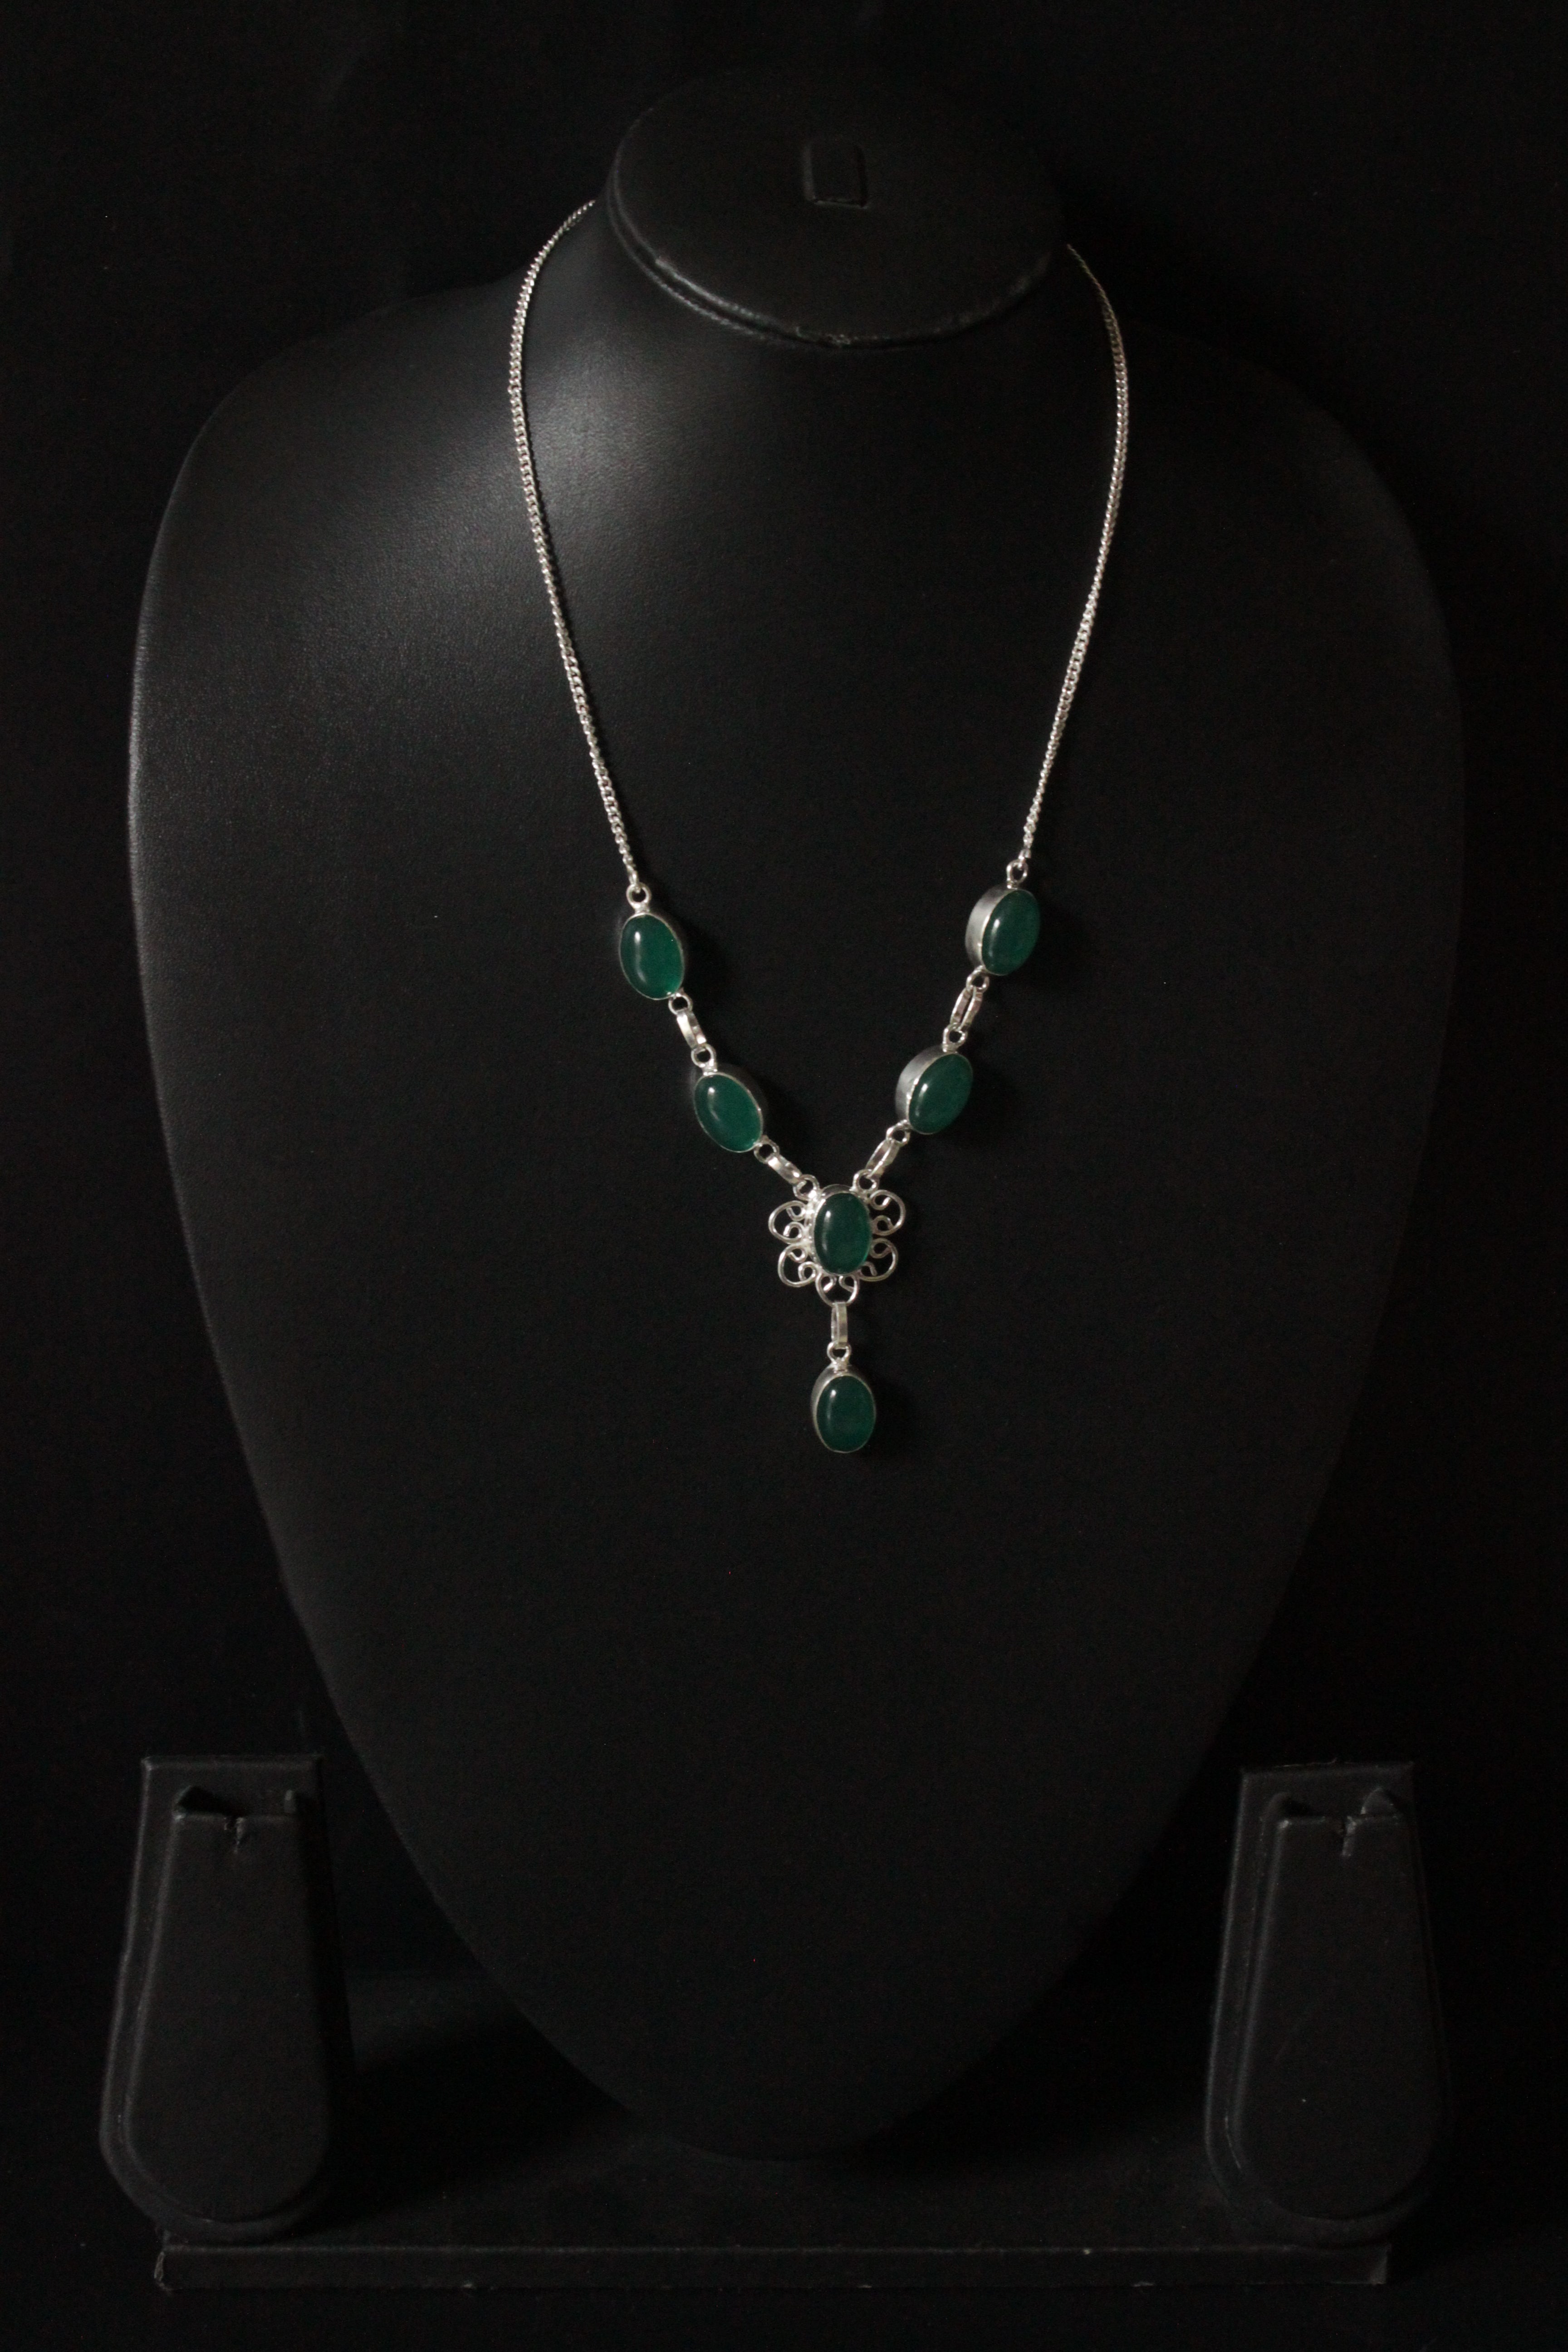 Sea Green Natural Gemstone Embedded Silver Plated Handmade Necklace